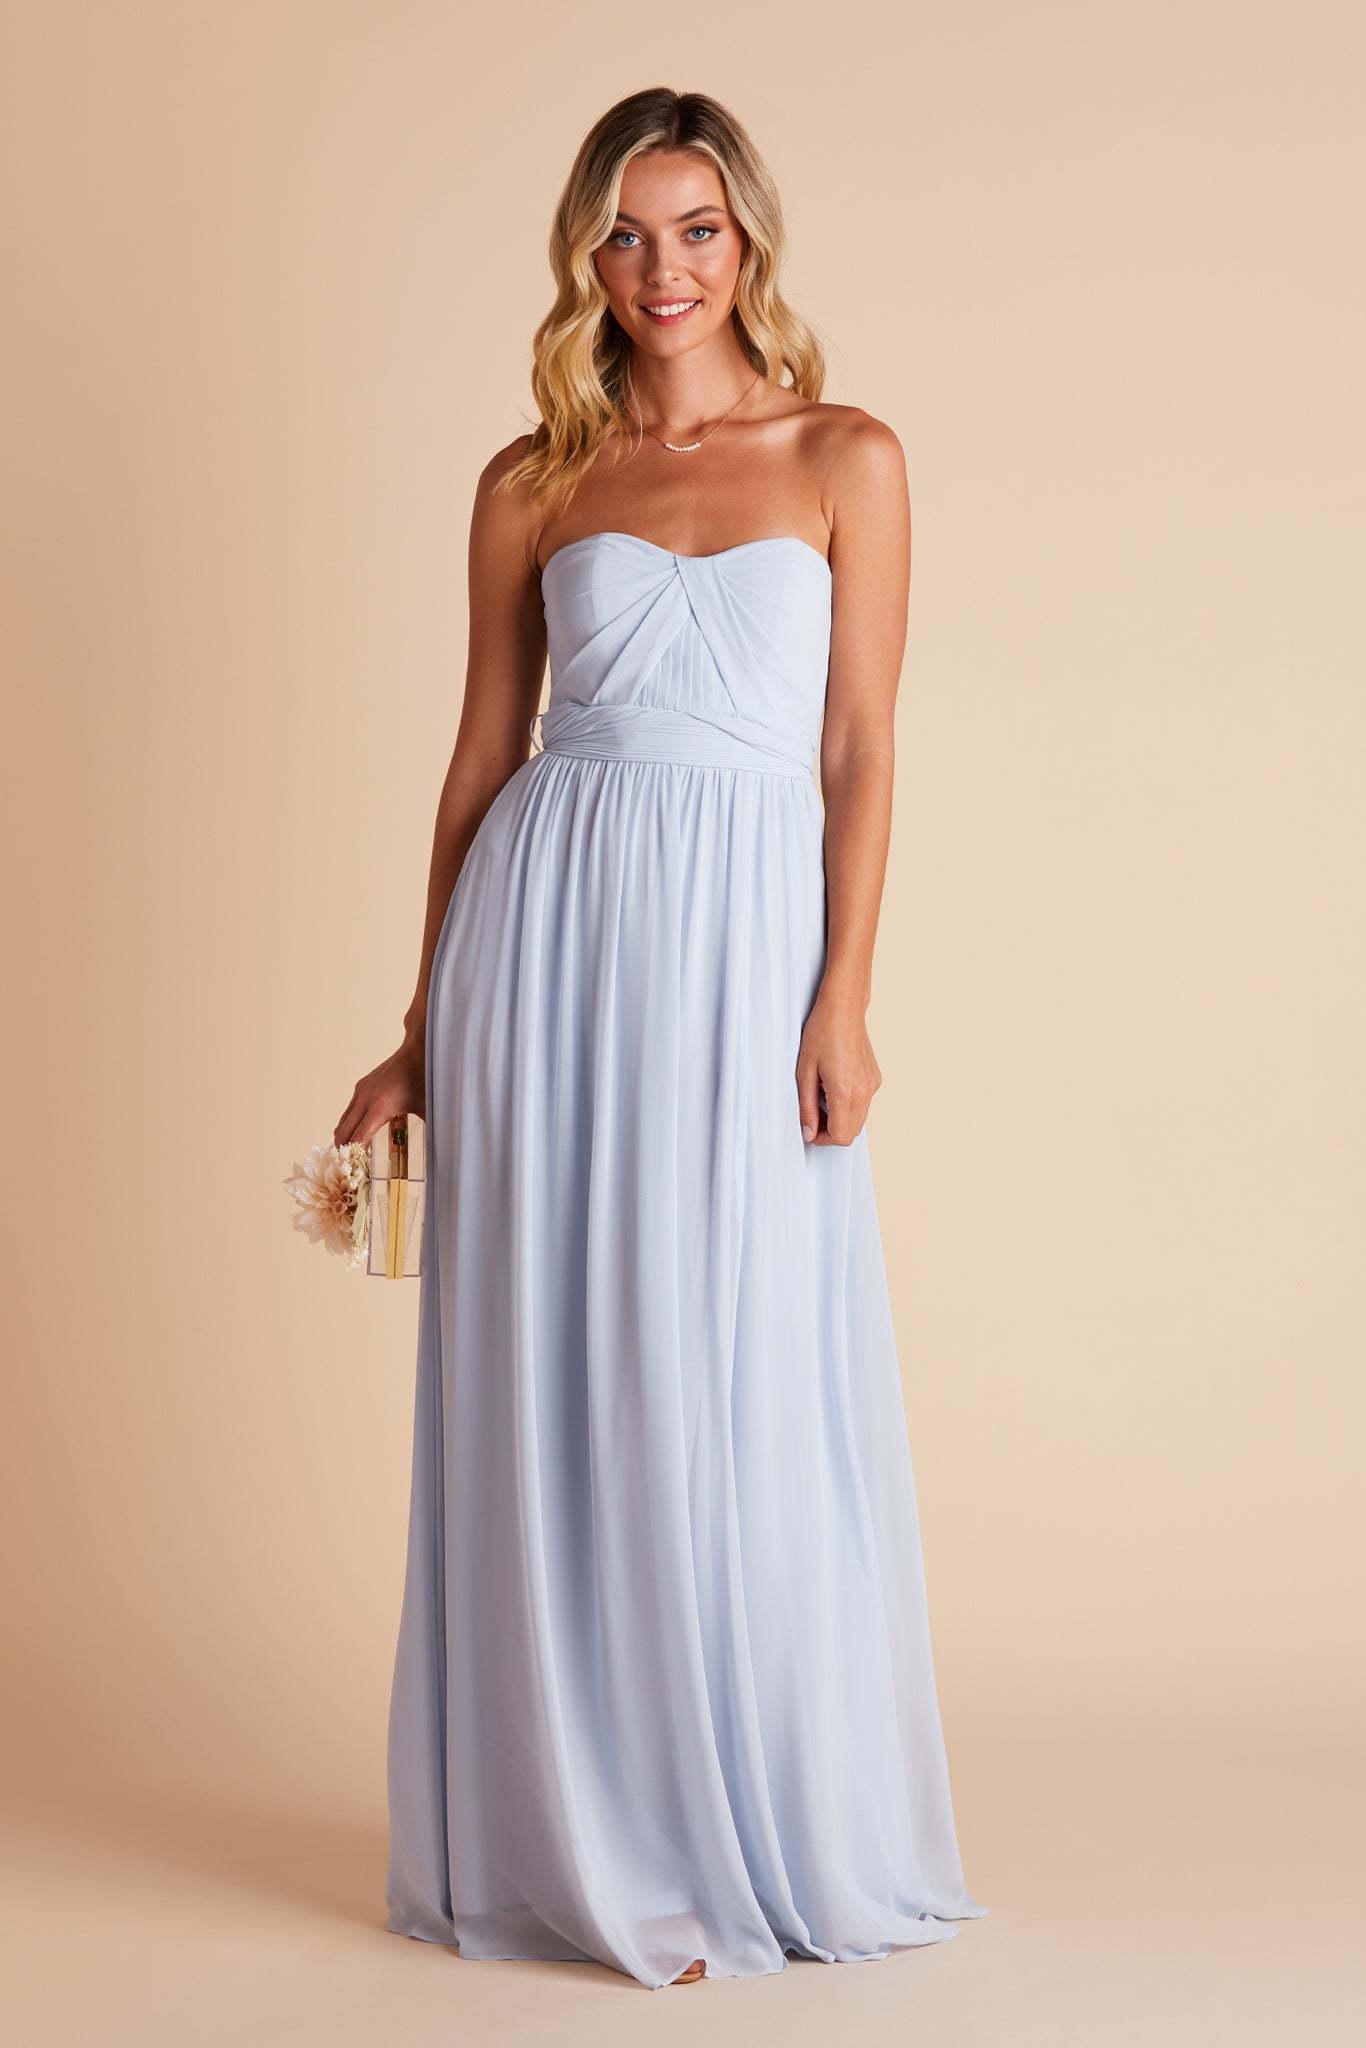 Grace convertible bridesmaid dress in ice blue chiffon by Birdy Grey, front view